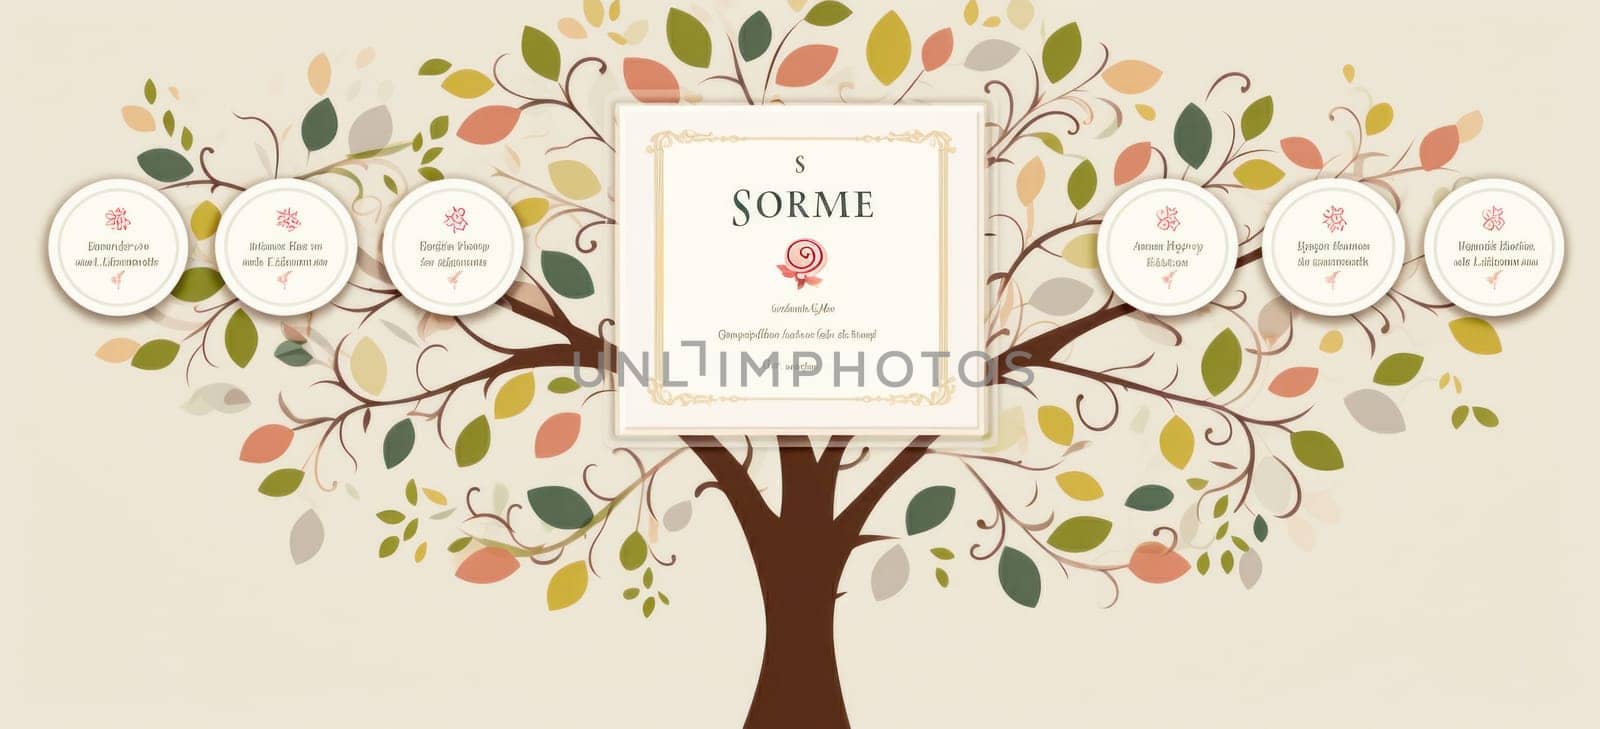 Personalized family tree postcard design by Yurich32